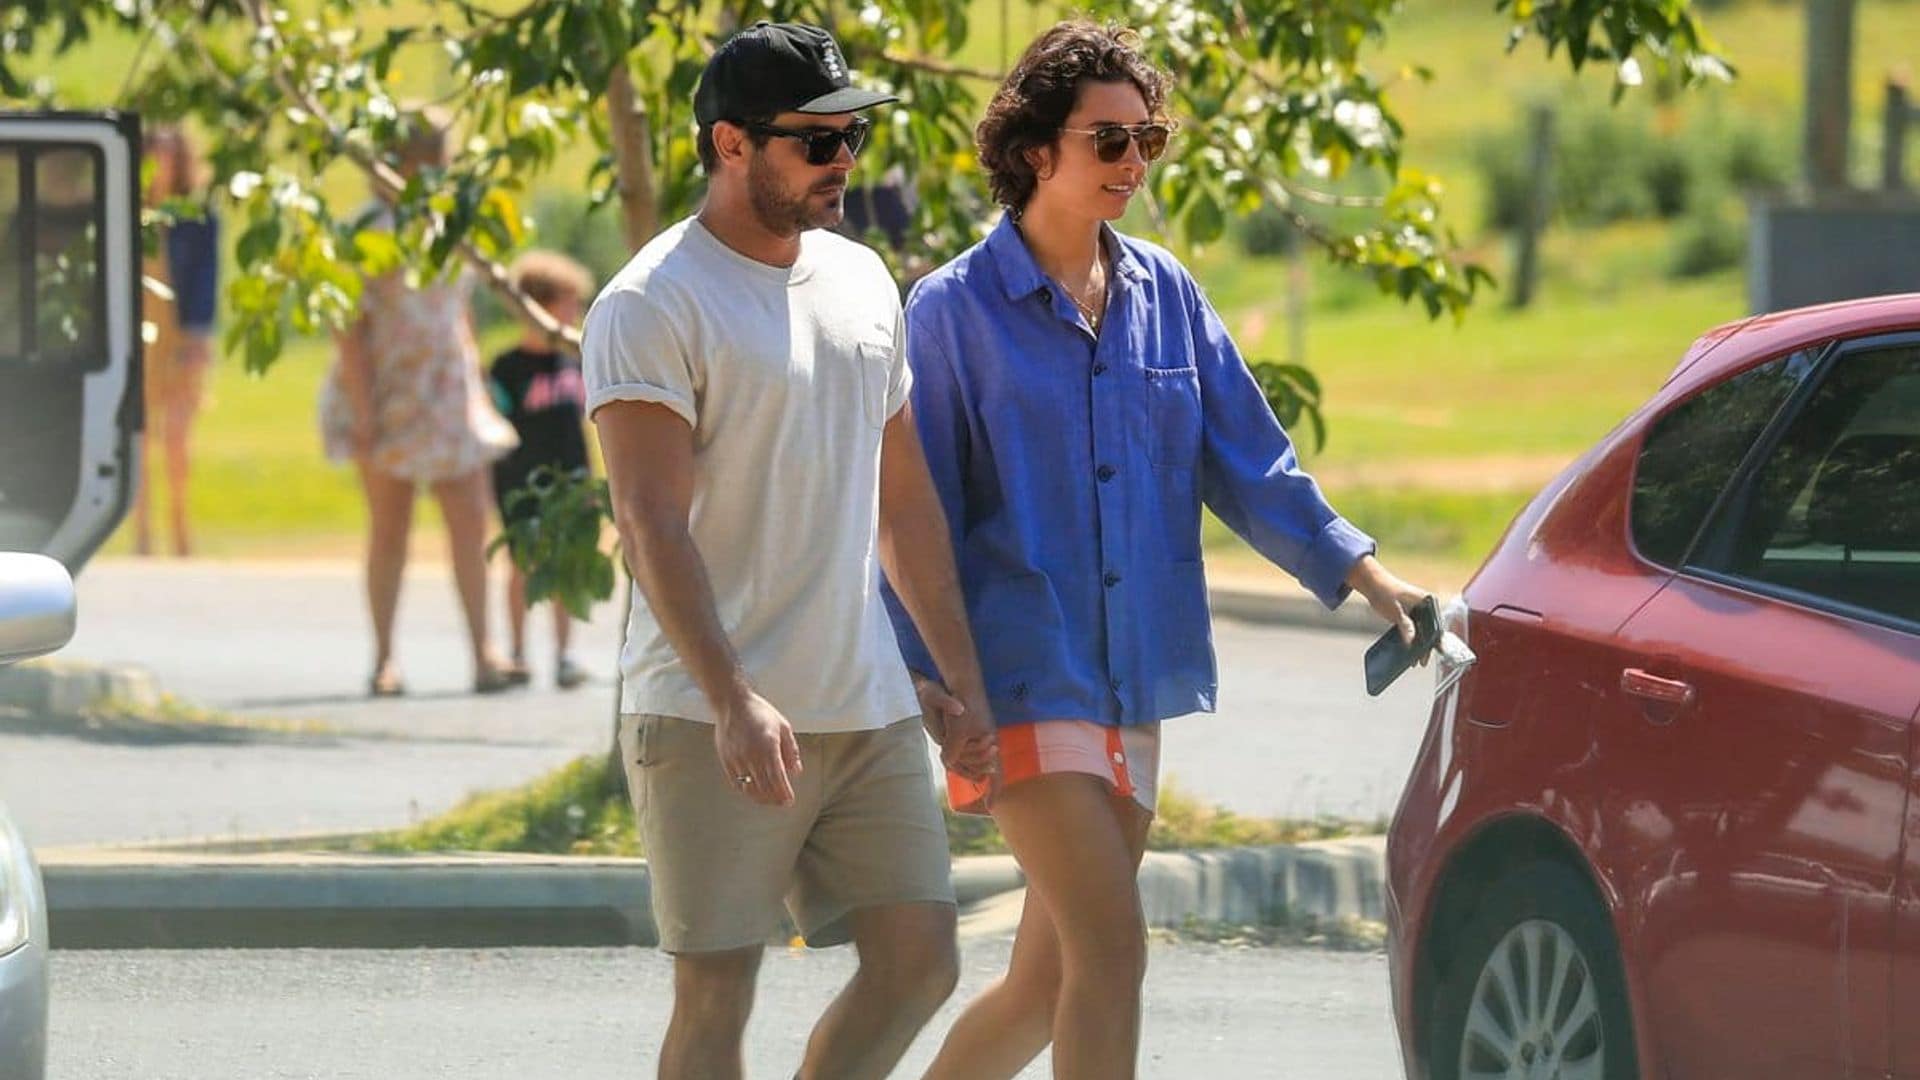 Zac Efron and Vanessa Valladares were spotted getting off a plane together despite breakup rumors